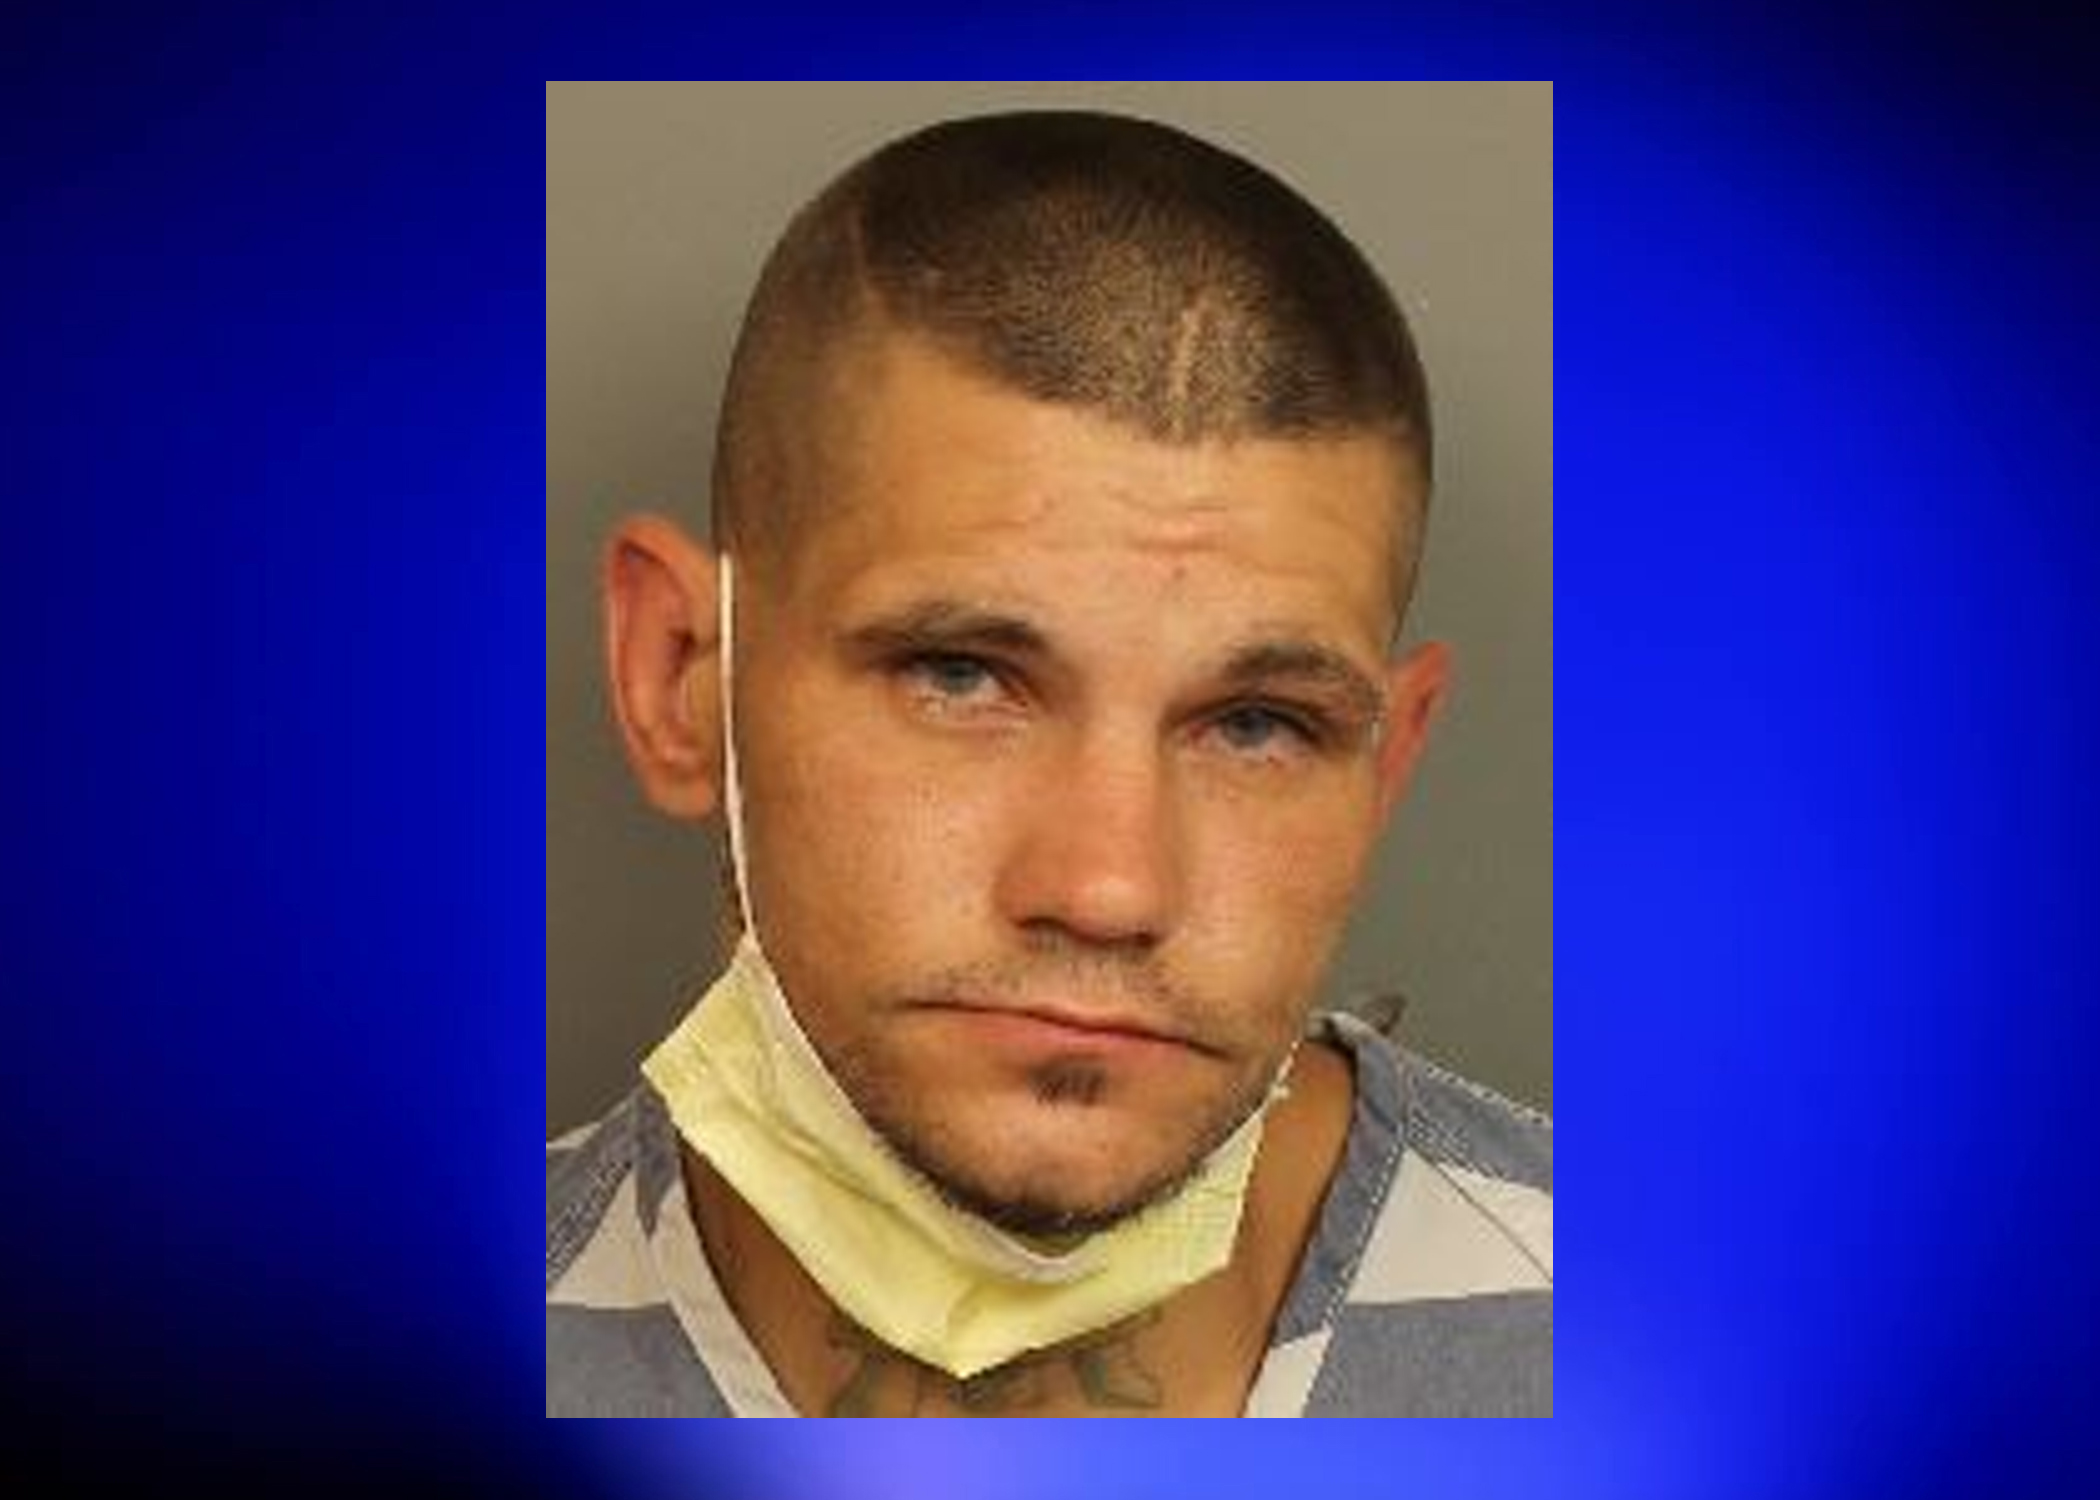 CRIME STOPPERS: Tarrant man wanted on several felony charges including escape and theft